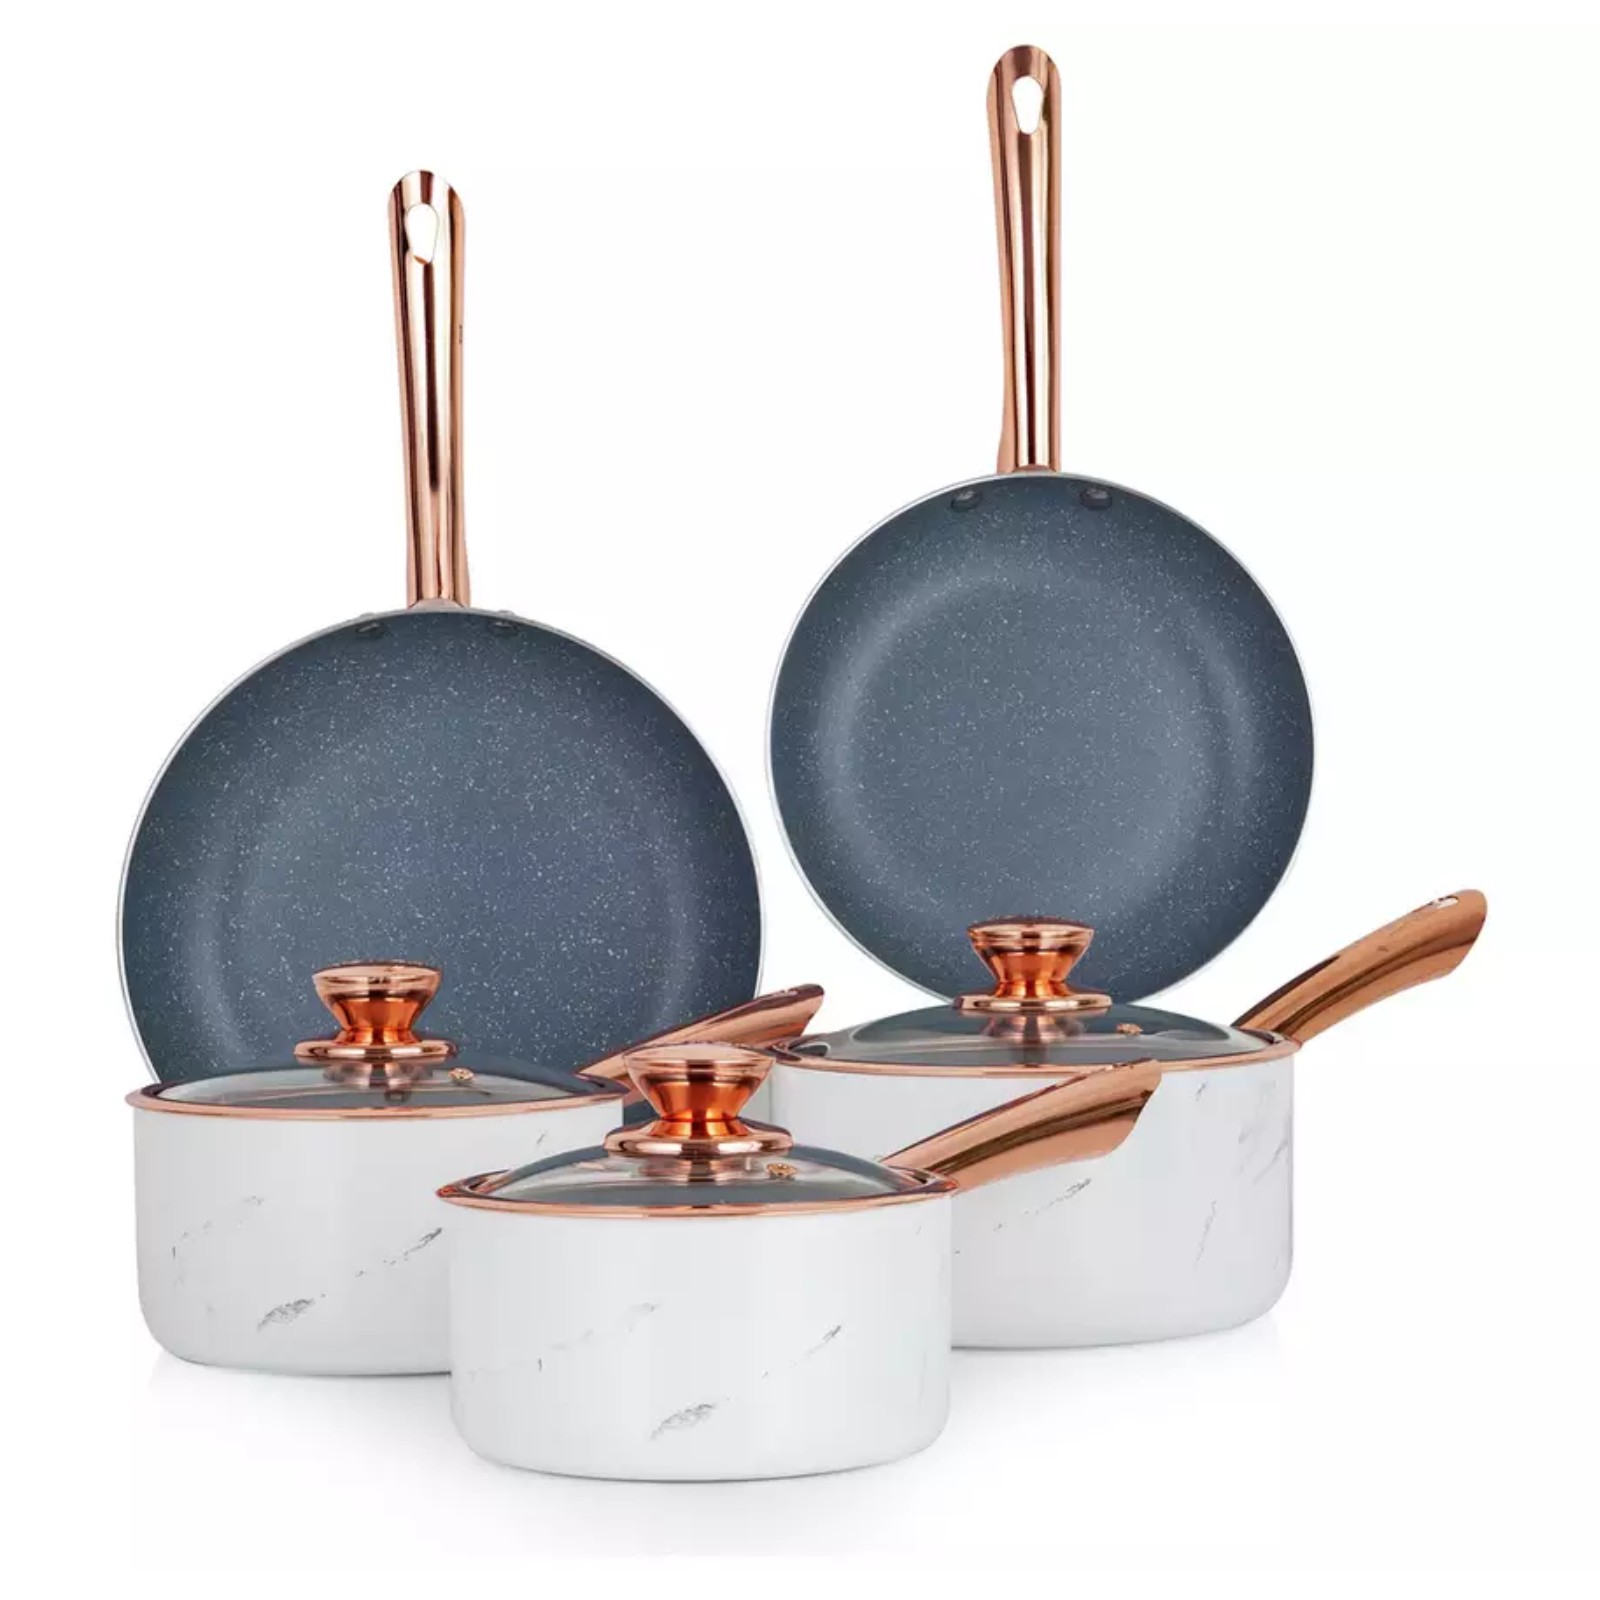 https://kettleandtoasterman.co.uk/wp-content/uploads/2023/07/Tower-T80064WR-Marble-Rose-Gold-Edition-5-Piece-Non-Stick-Pan-Set.jpg